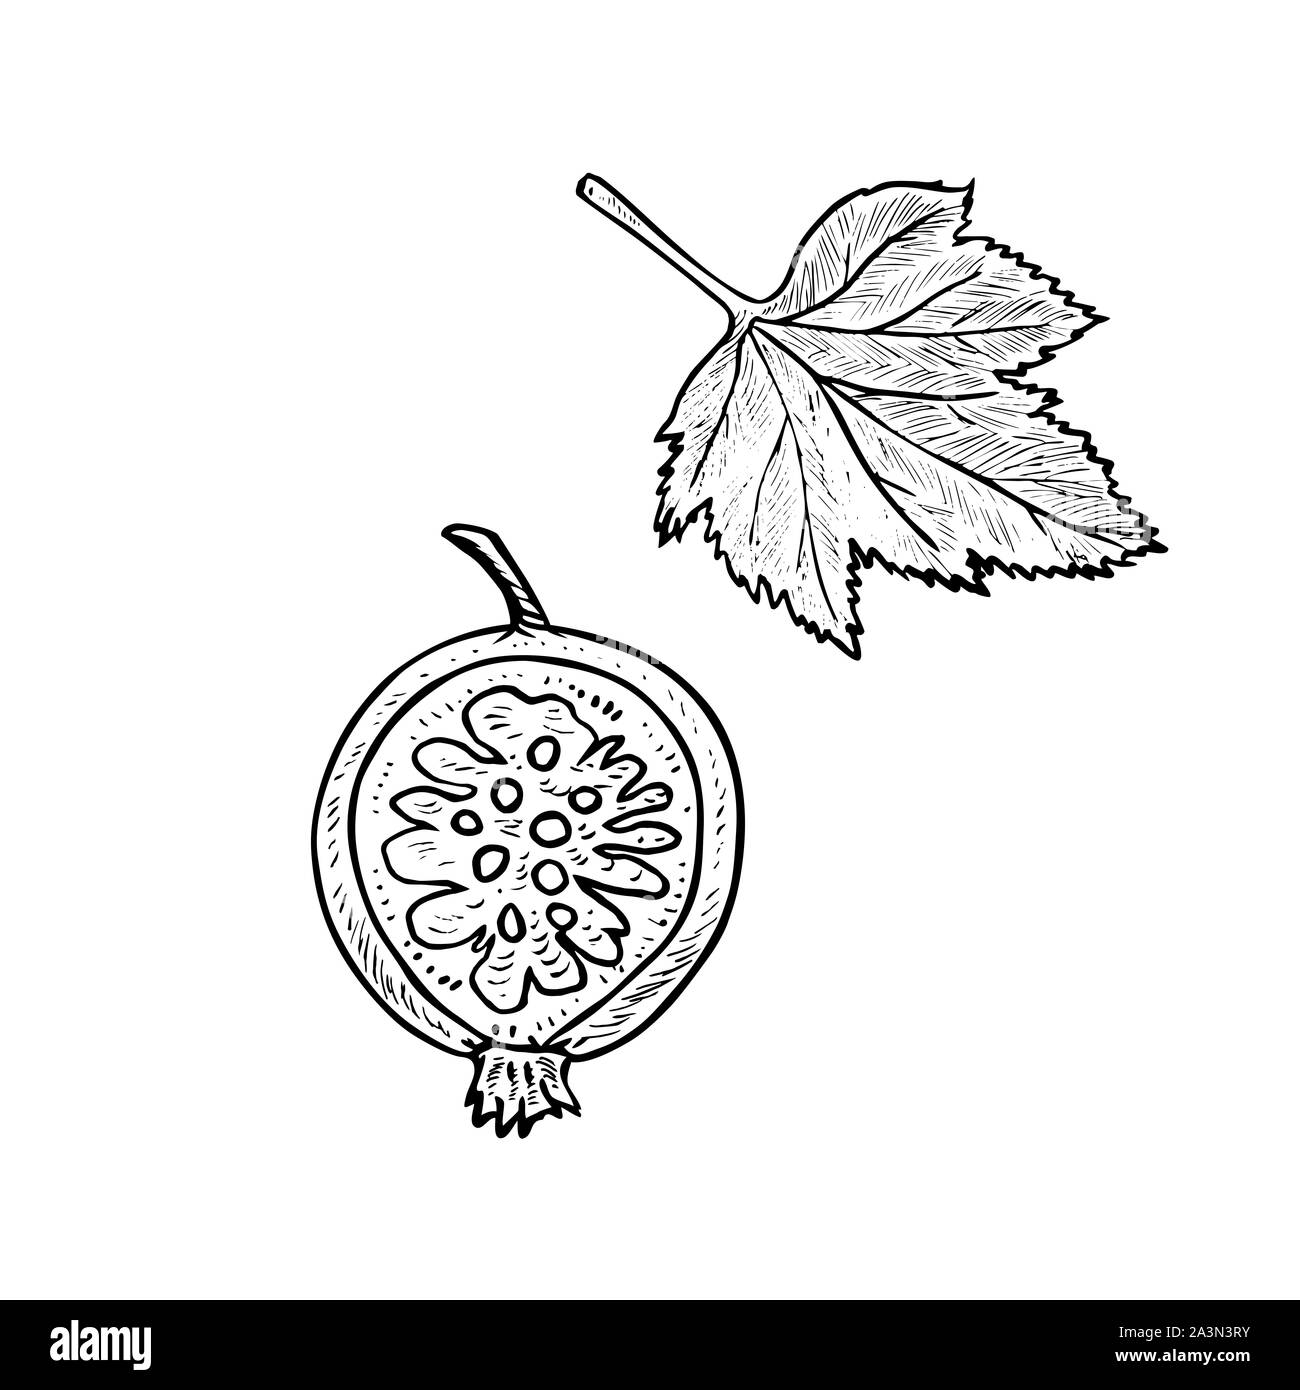 Blackcurrant or black currant (Ribes nigrum) berry cut half and leaf, doodle gravure style sketch illustration, element for design Stock Photo